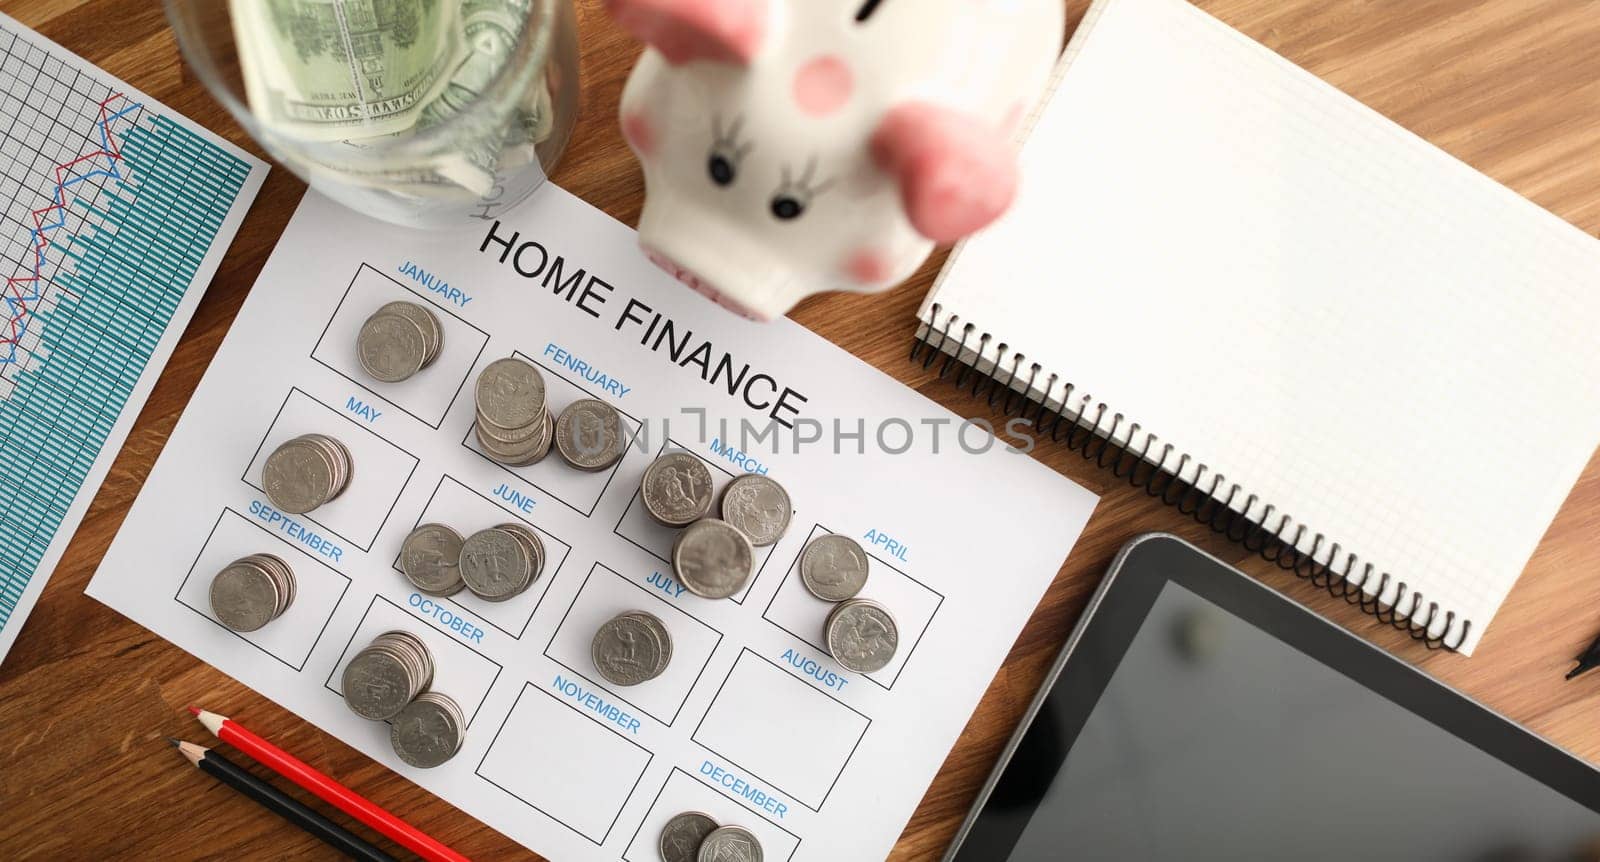 Top view of coin tover with paper calendar against wooden table background. Home finance concept